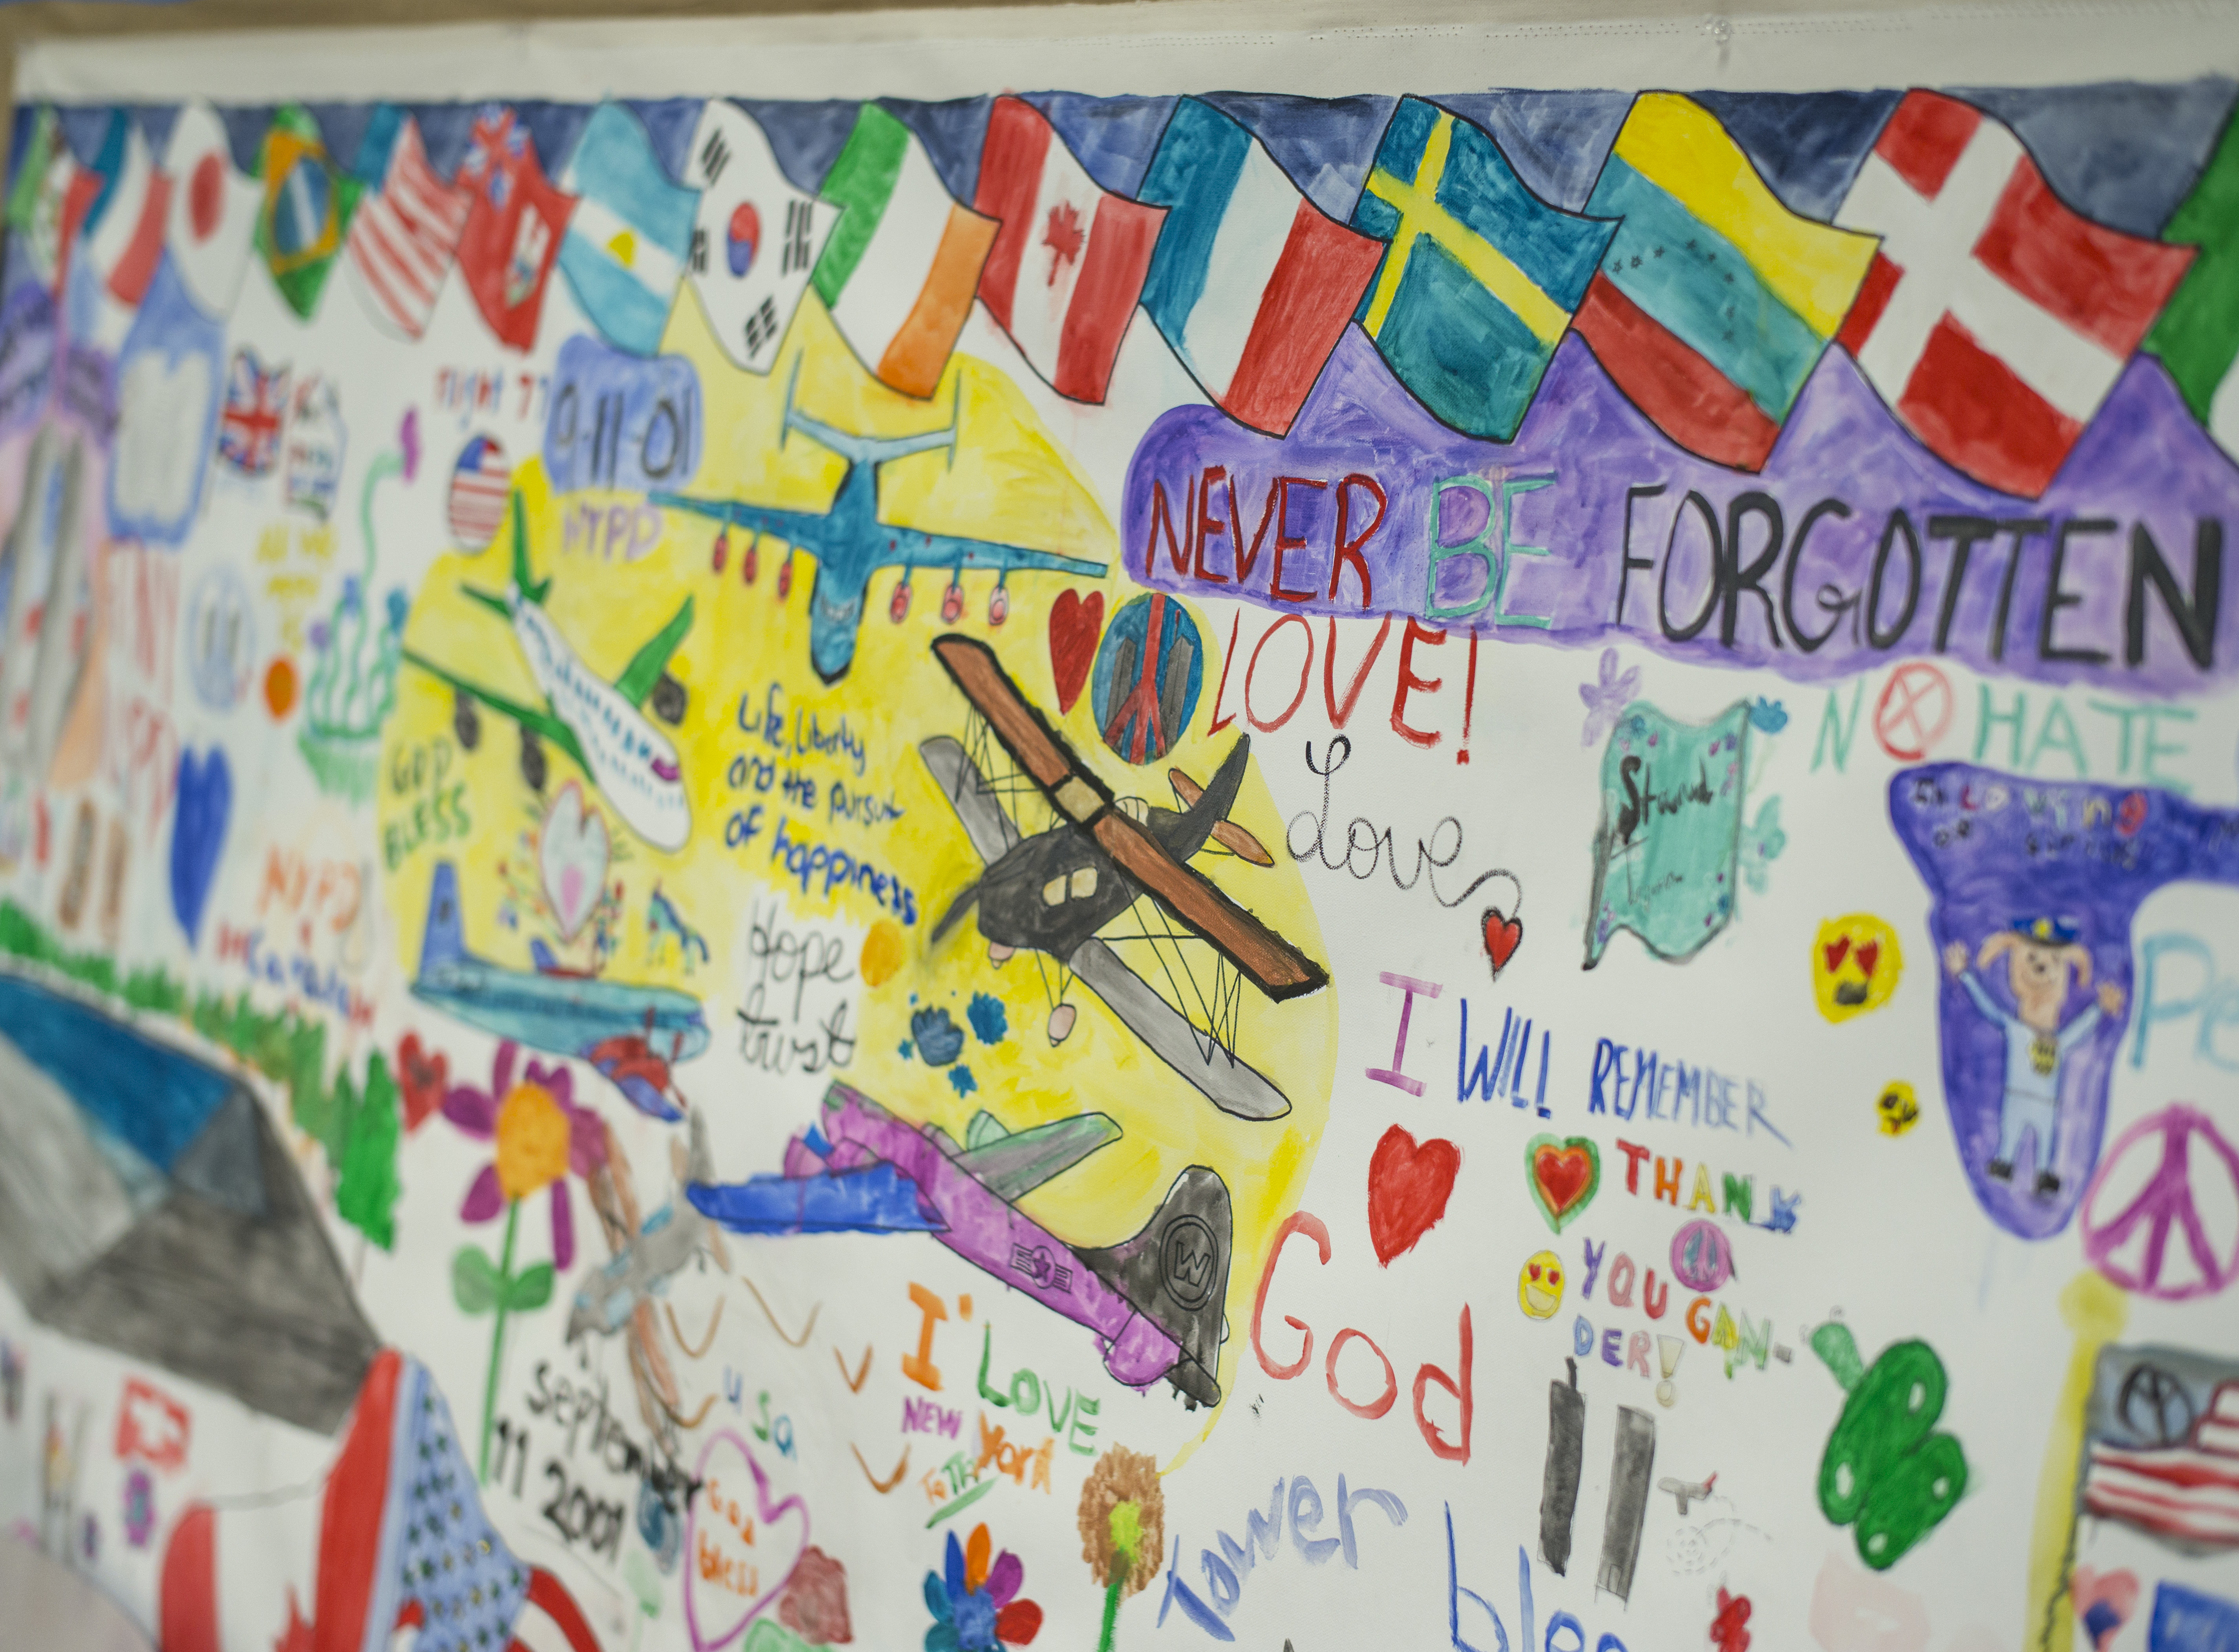 A mural created for Gander, Newfoundland, thanks the town for hosting stranded travelers on 9/11. The colorful mural includes drawings of planes, hearts, flowers, peace signs, and messages of thanks.